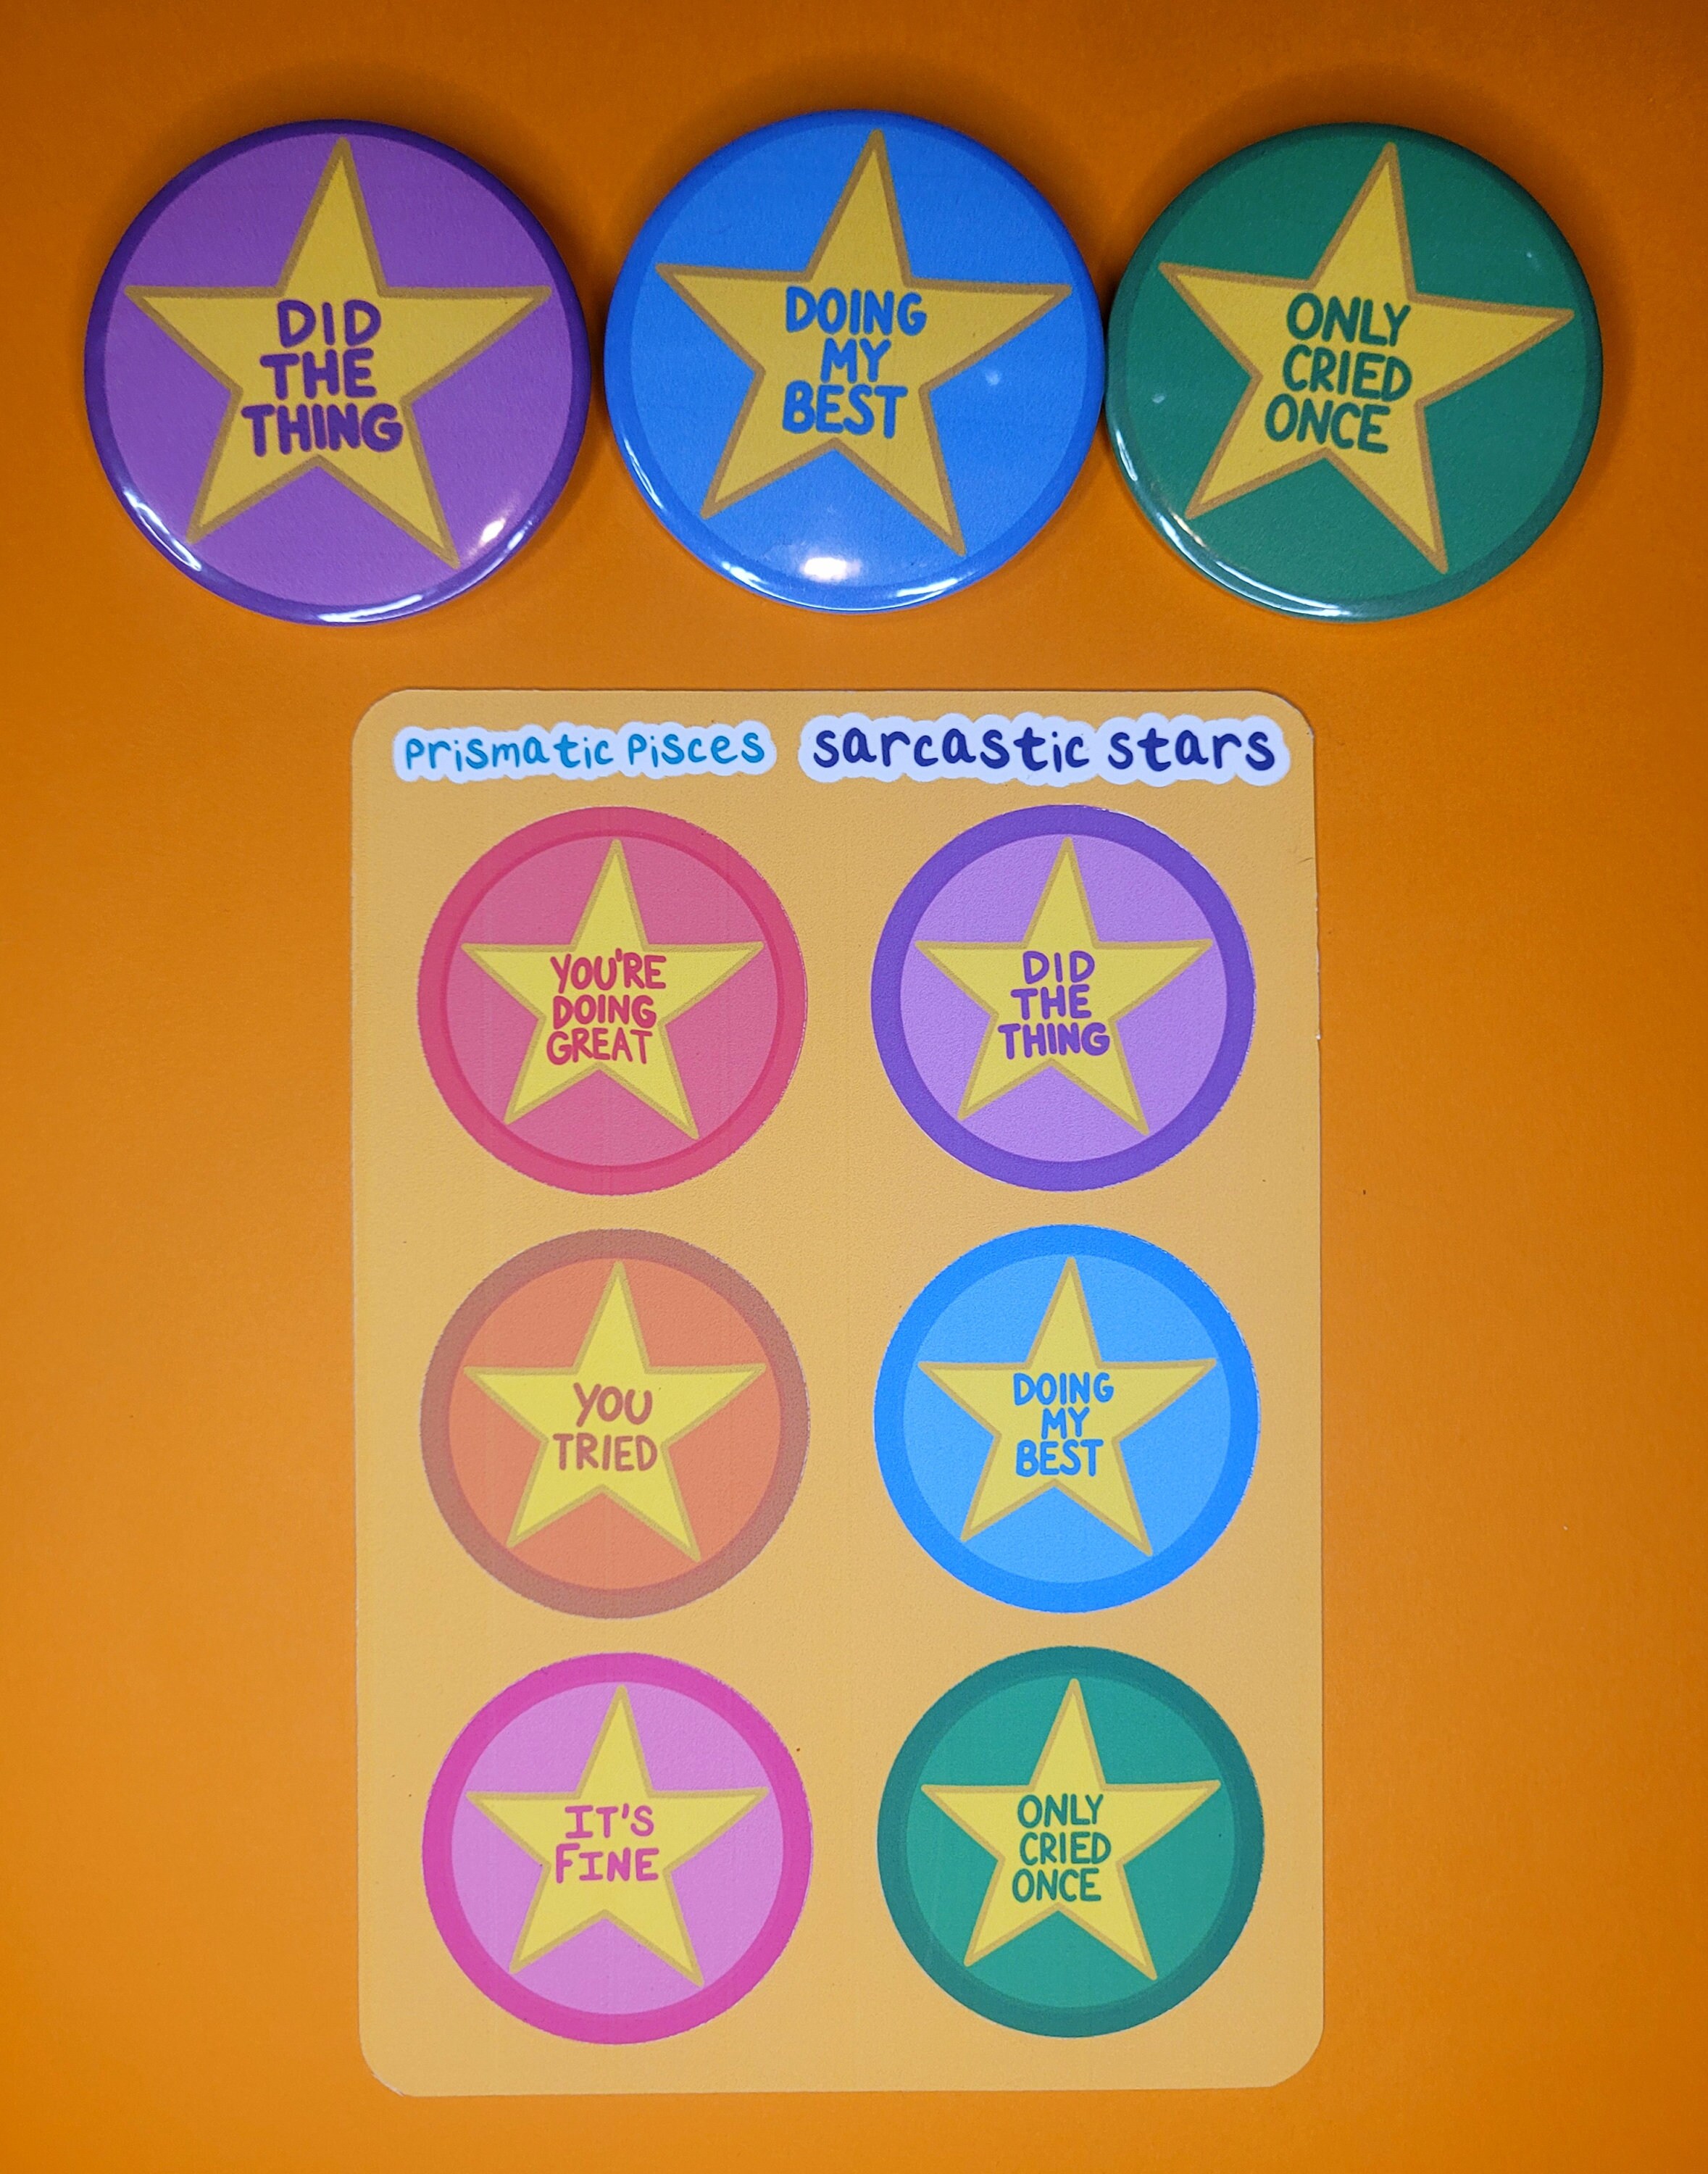 You get a gold star Sticker for Sale by even-odd